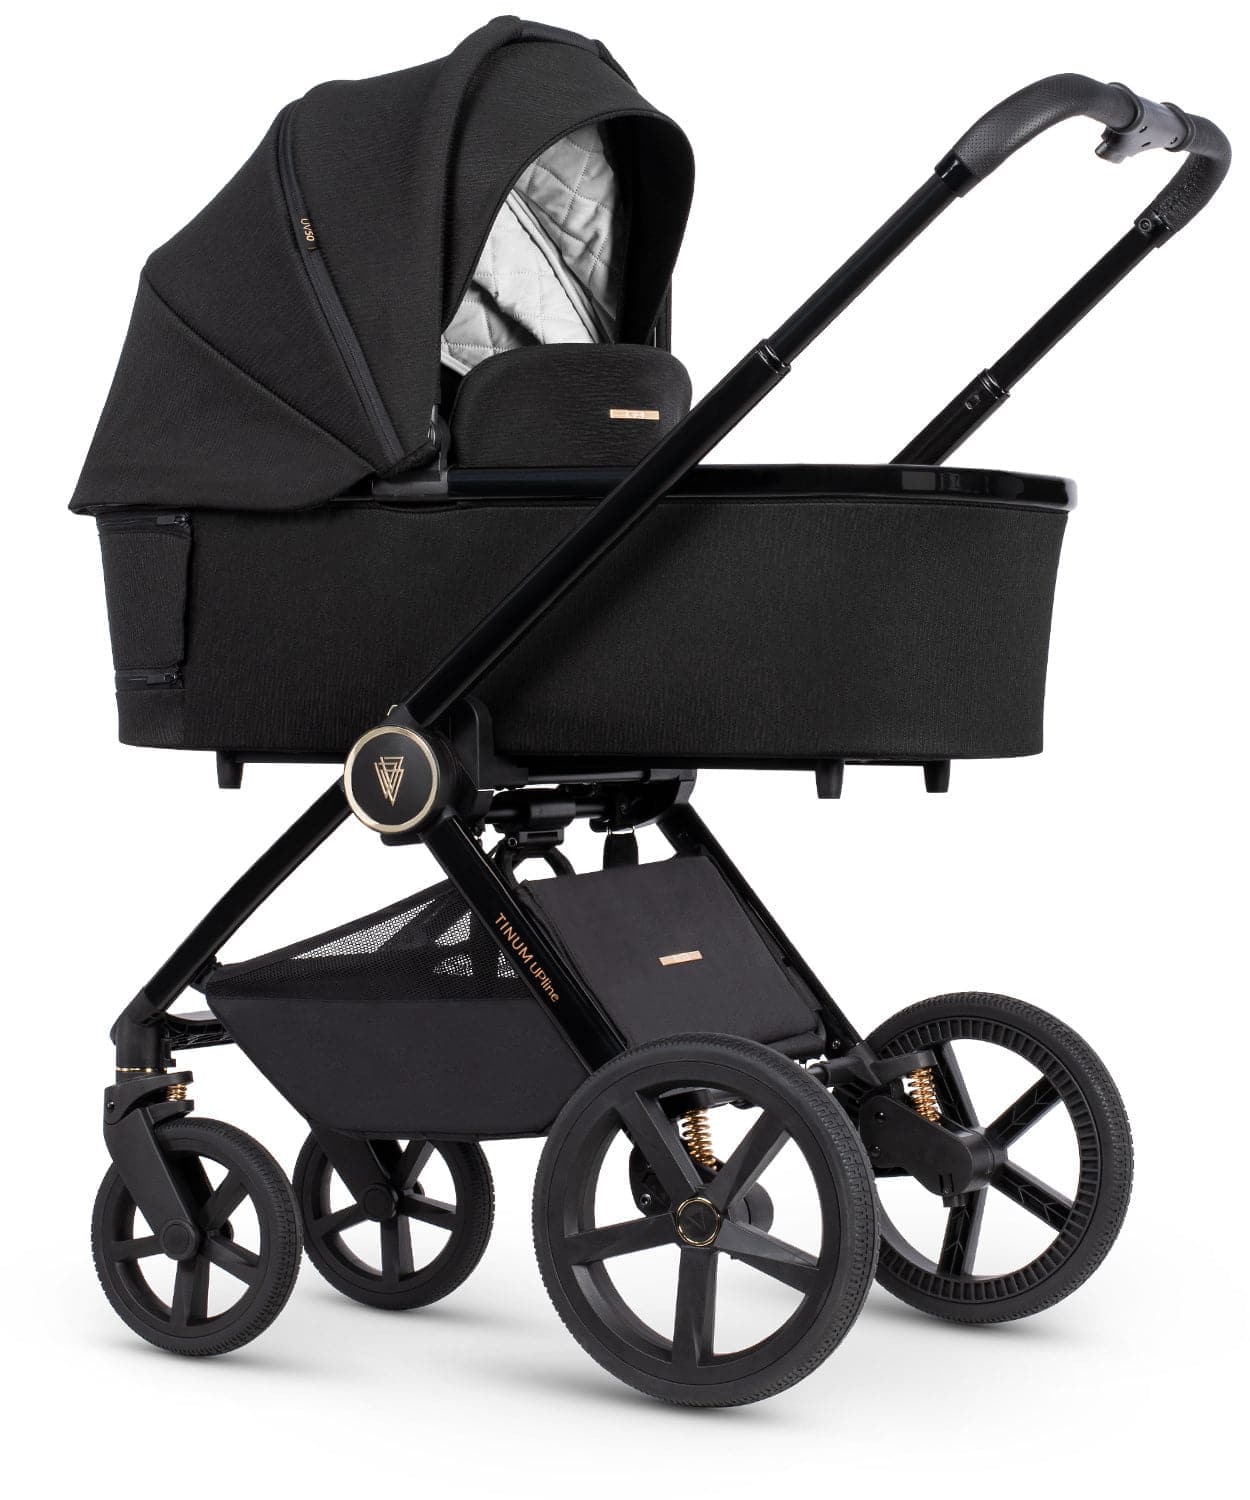 Venicci Tinum Upline 3 in 1 Travel System Bundle + Base - All Black - For Your Little One